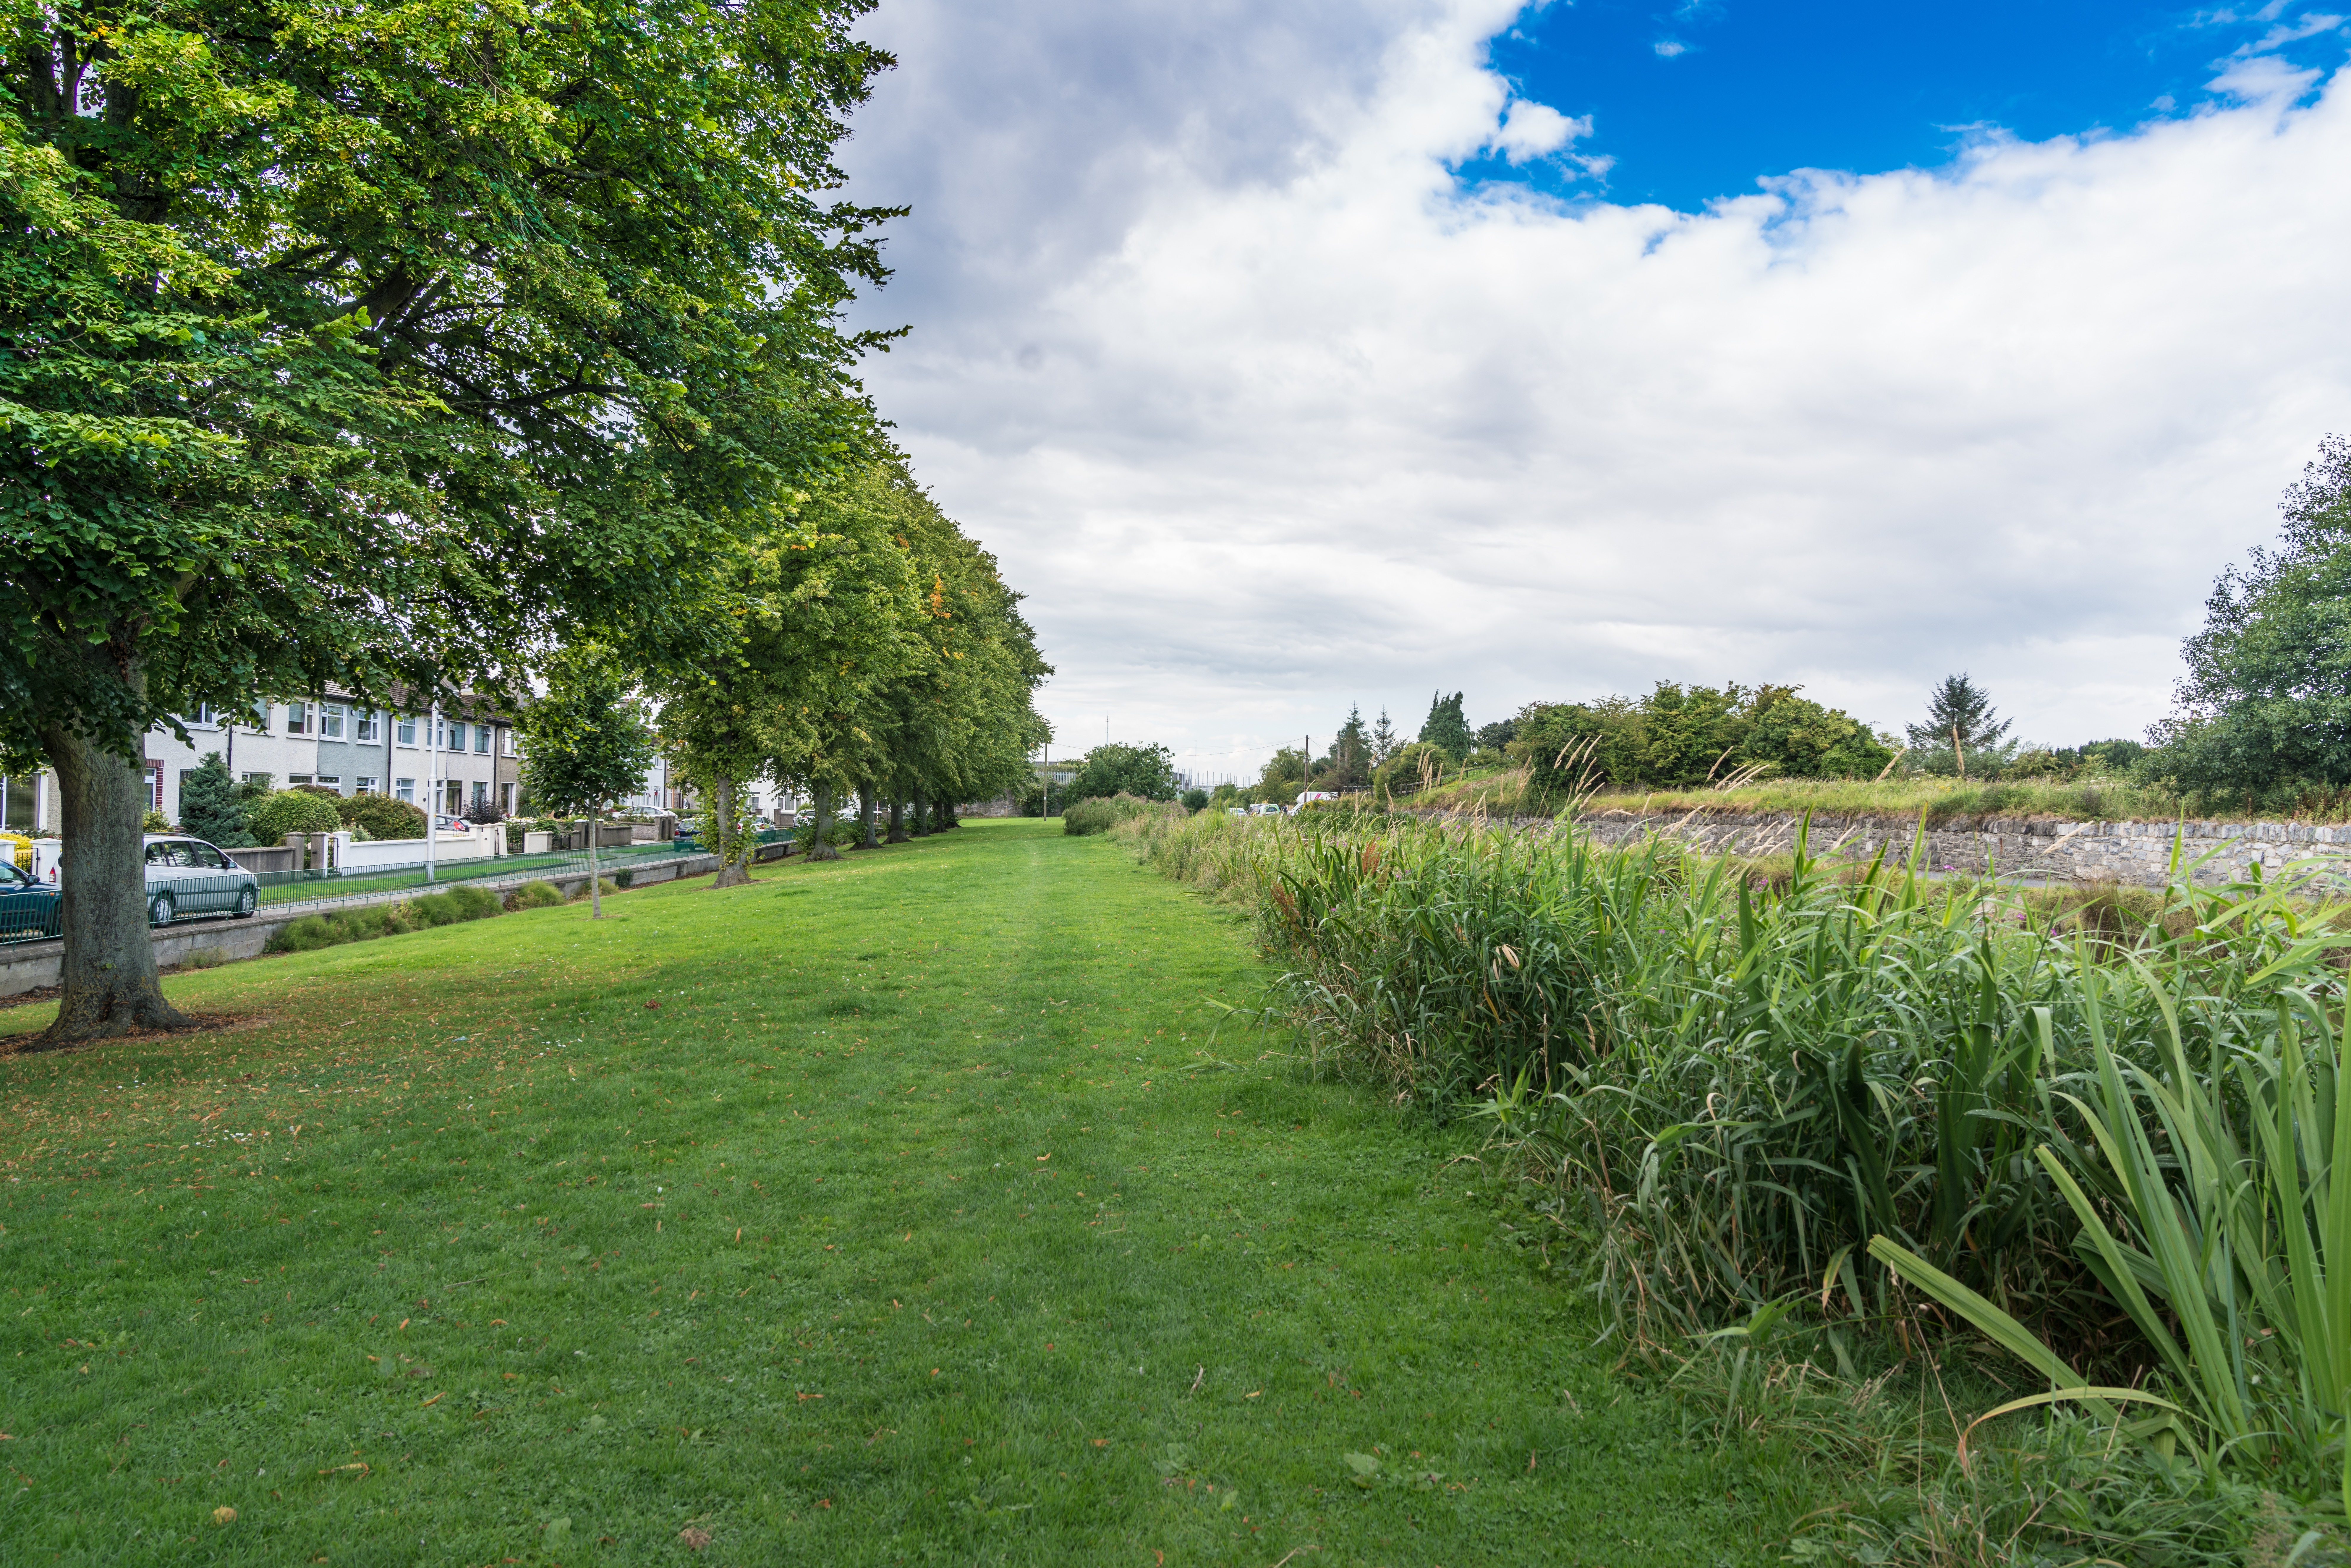  ROYAL CANAL - CABRA AREA 003 